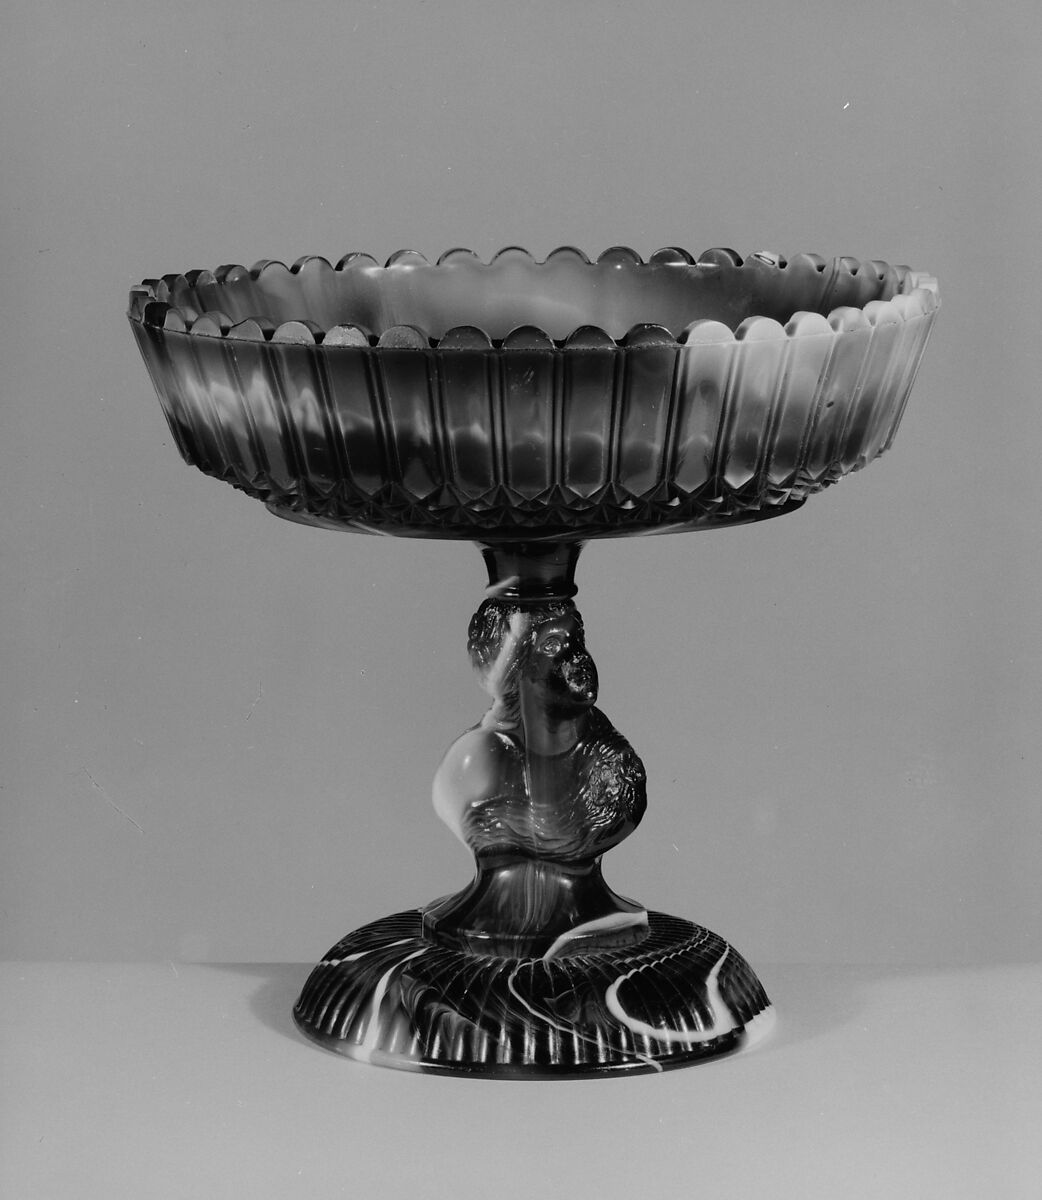 Purple marble glass compote, Challinor, Taylor and Company (1866–1891), Pressed purple marble glass, American 